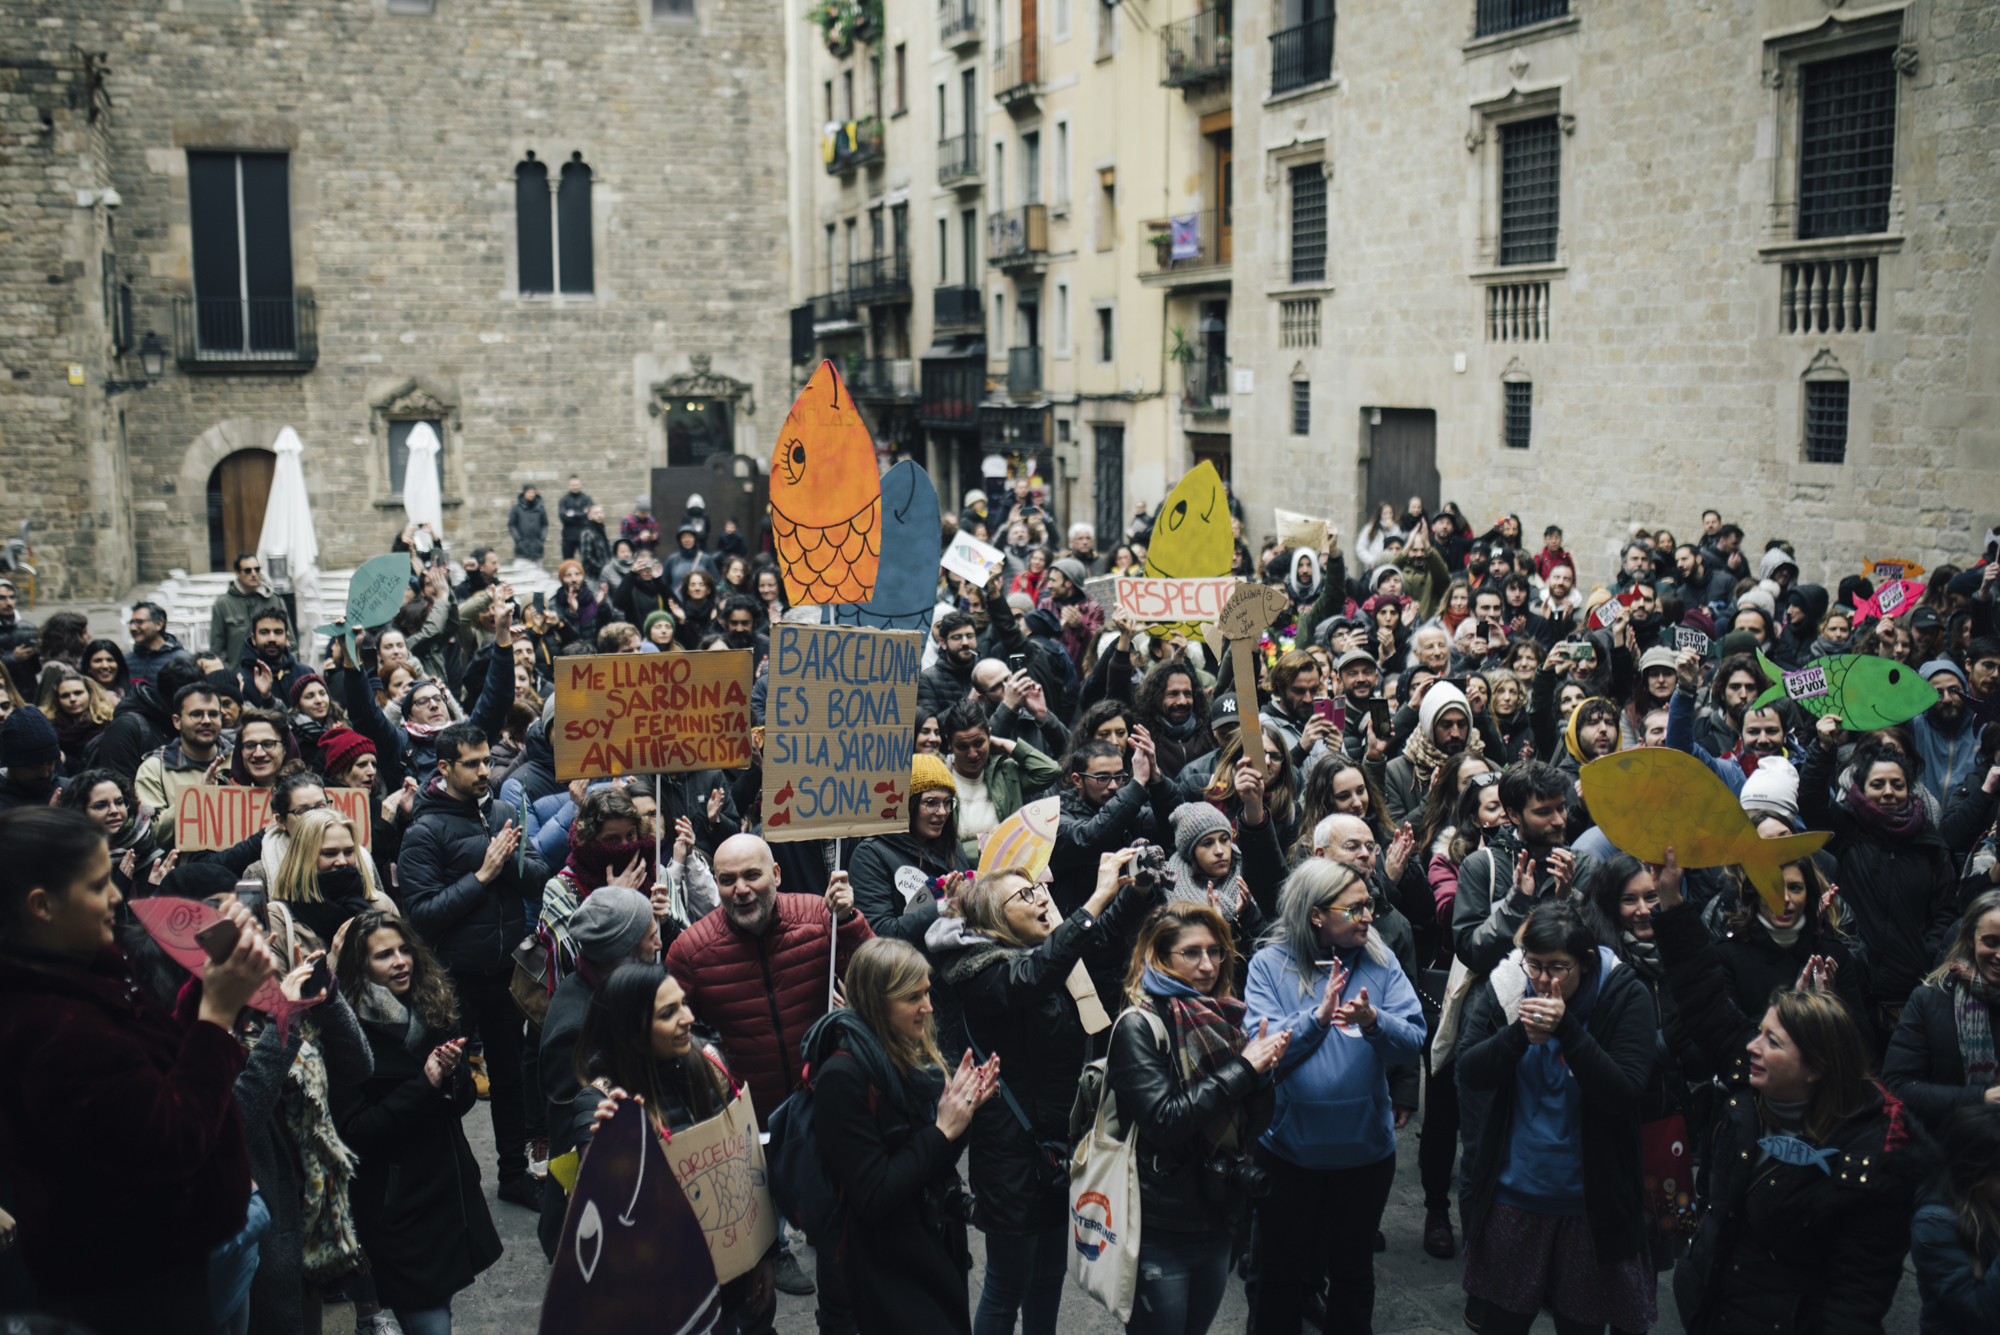 Some 500 people came together in the Italian sardines movement's first public protest in Barcelona (© Alice Brazzit)